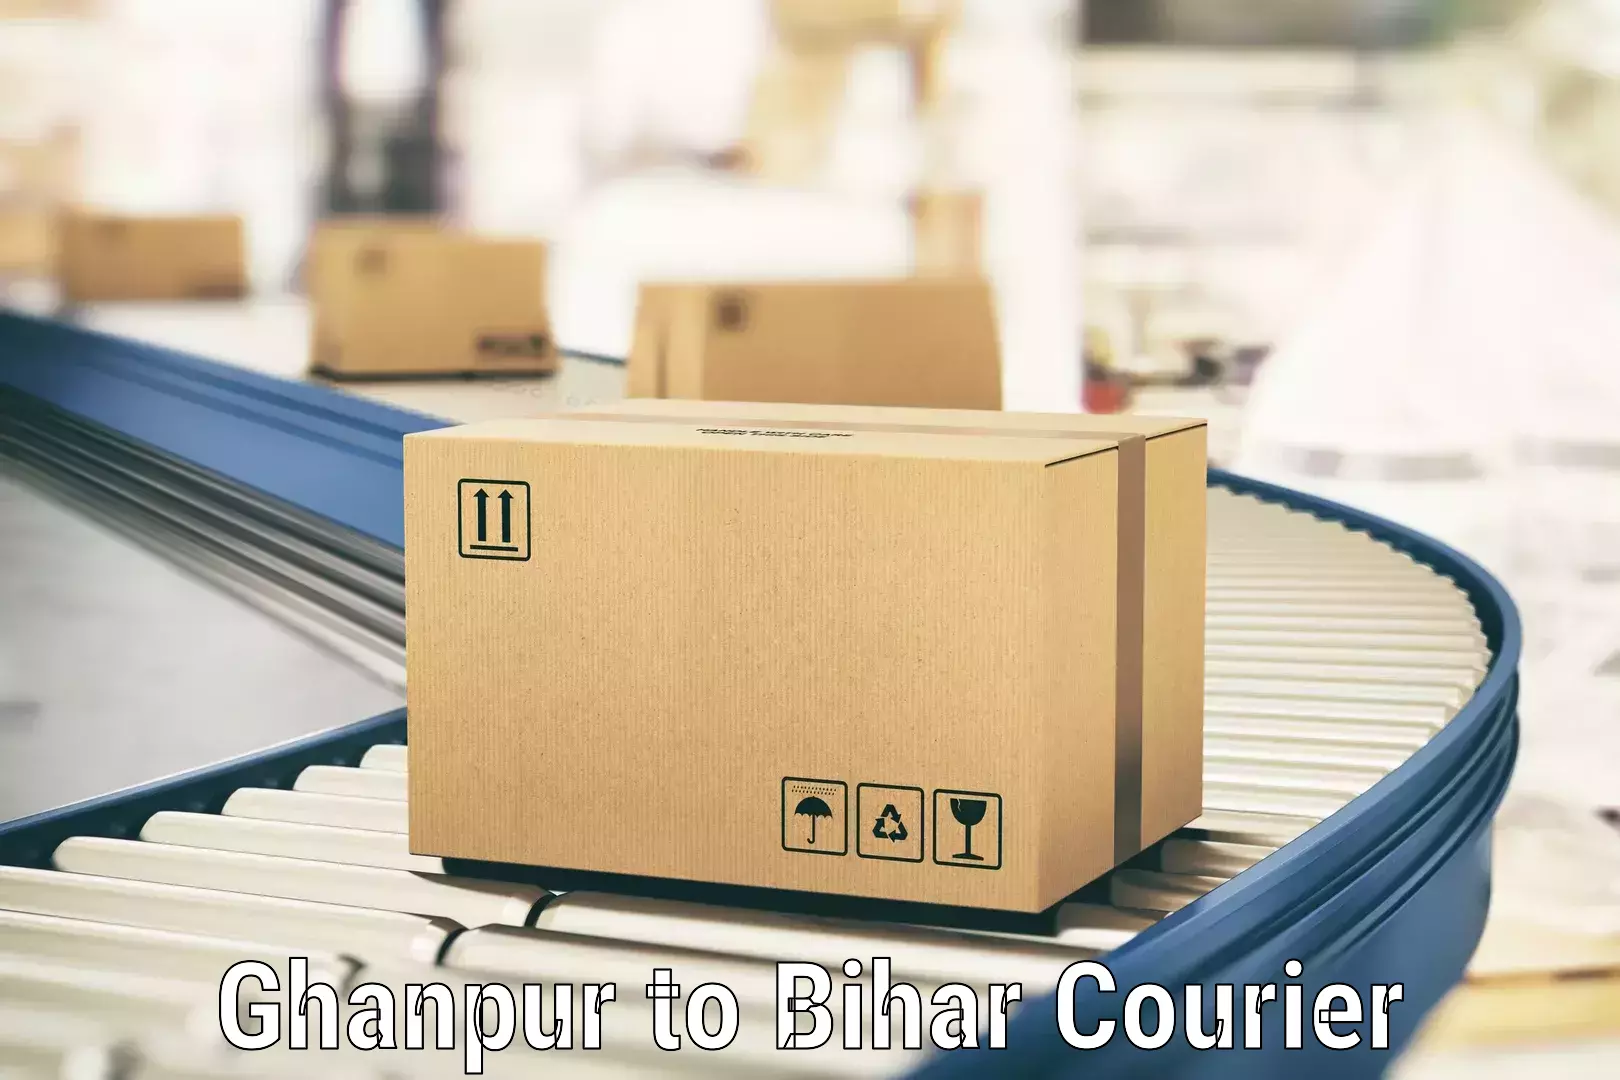 Large-scale shipping solutions Ghanpur to Hasanpura